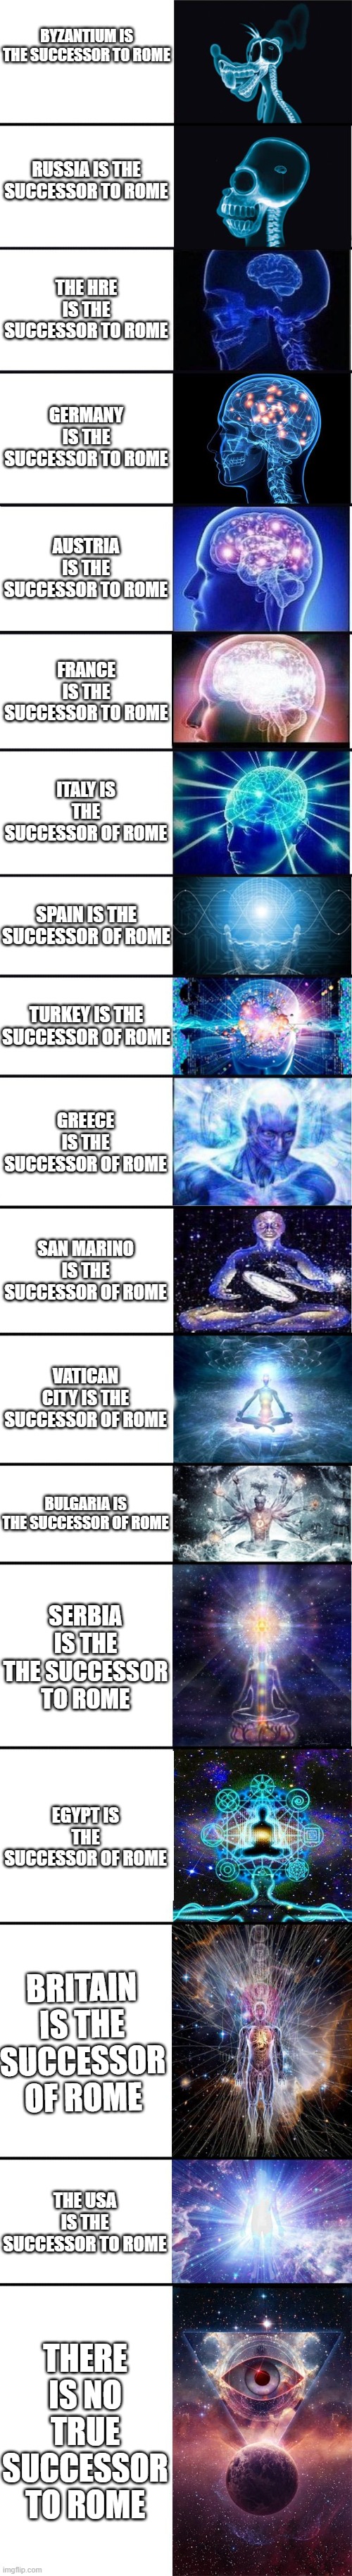 Who do you is the true successor to rome | BYZANTIUM IS THE SUCCESSOR TO ROME; RUSSIA IS THE SUCCESSOR TO ROME; THE HRE IS THE SUCCESSOR TO ROME; GERMANY IS THE SUCCESSOR TO ROME; AUSTRIA IS THE SUCCESSOR TO ROME; FRANCE IS THE SUCCESSOR TO ROME; ITALY IS THE SUCCESSOR OF ROME; SPAIN IS THE SUCCESSOR OF ROME; TURKEY IS THE SUCCESSOR OF ROME; GREECE IS THE SUCCESSOR OF ROME; SAN MARINO IS THE SUCCESSOR OF ROME; VATICAN CITY IS THE SUCCESSOR OF ROME; BULGARIA IS THE SUCCESSOR OF ROME; SERBIA IS THE THE SUCCESSOR TO ROME; EGYPT IS THE SUCCESSOR OF ROME; BRITAIN IS THE SUCCESSOR OF ROME; THE USA IS THE SUCCESSOR TO ROME; THERE IS NO TRUE SUCCESSOR TO ROME | image tagged in expanding brain 9001 | made w/ Imgflip meme maker